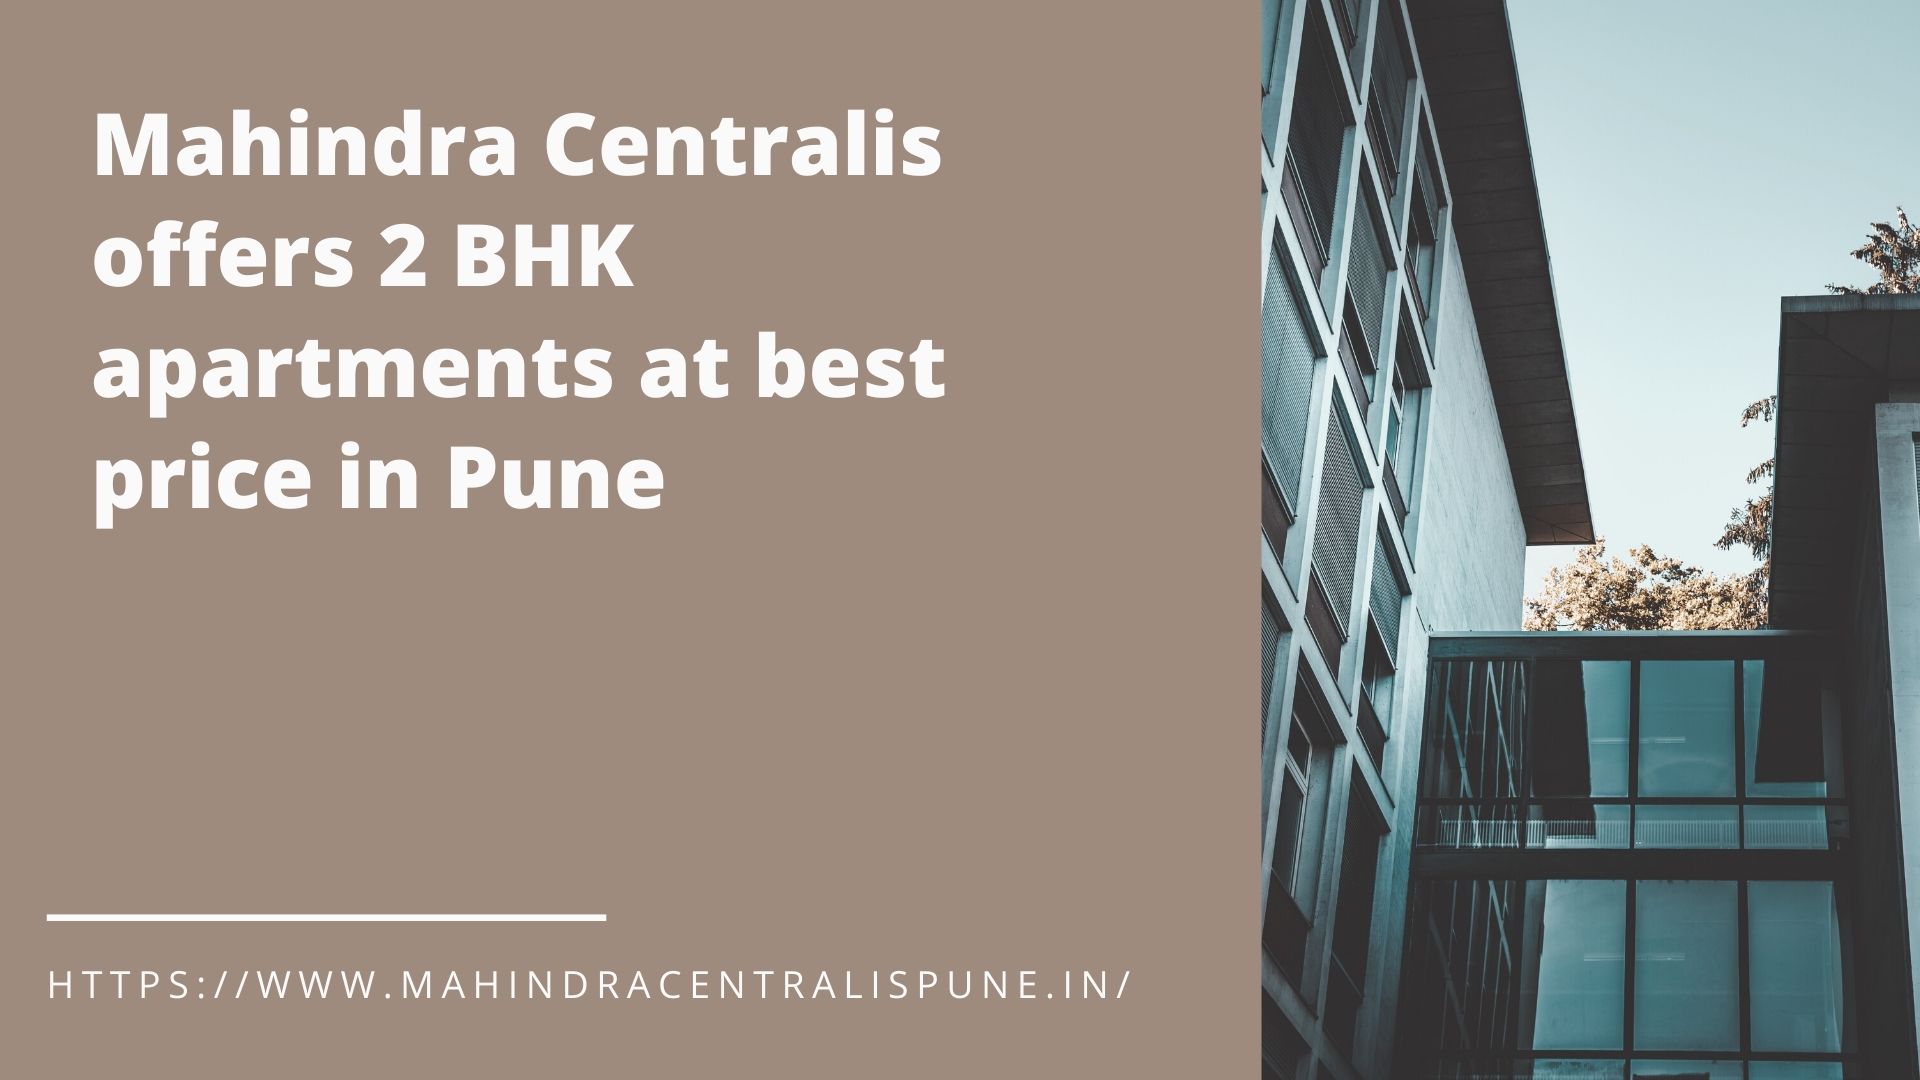 Mahindra Centralis offers 2 BHK apartments at best price in Pune